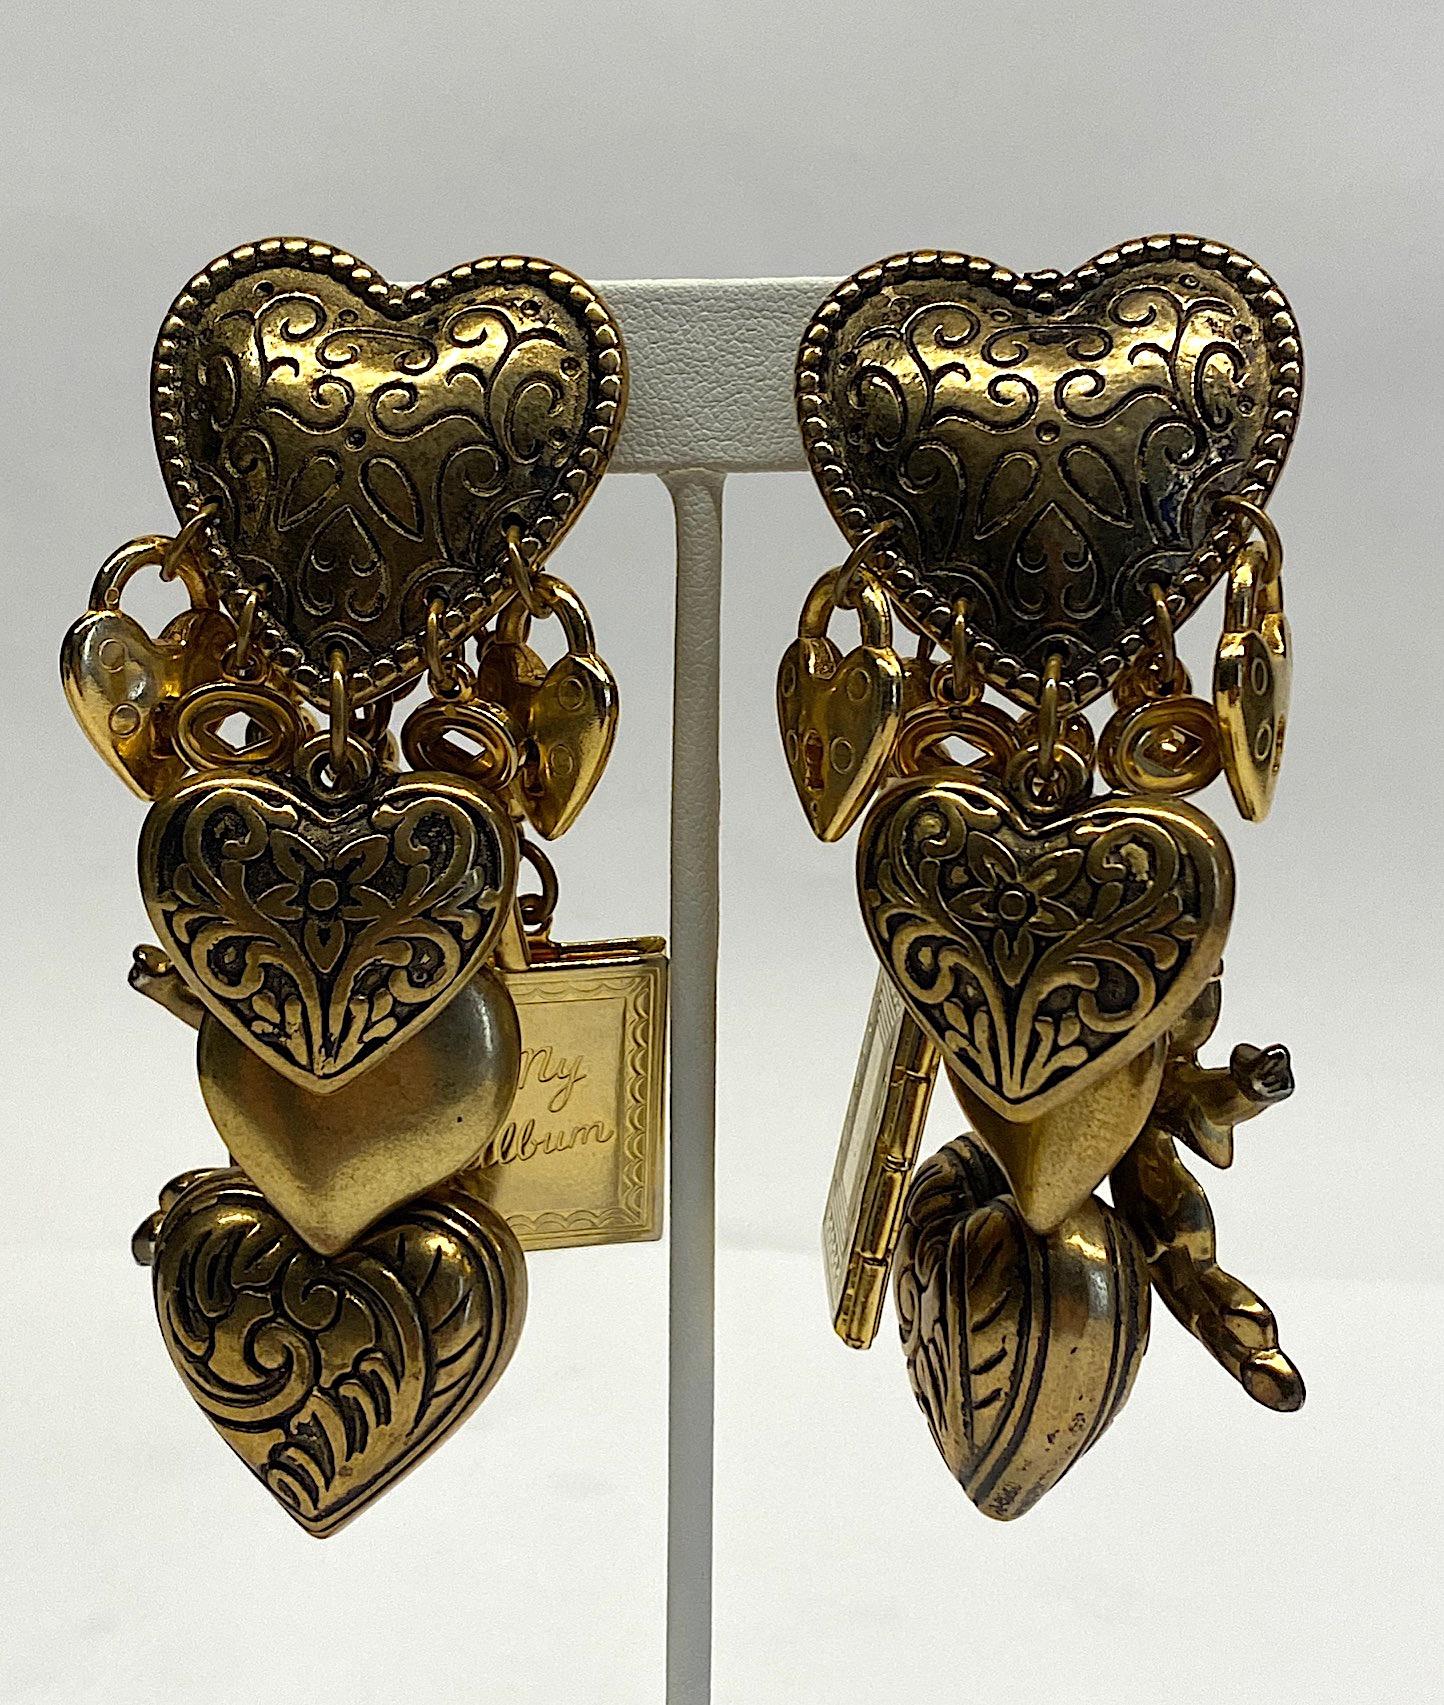 A fabulous example of 1980s big and chunky style vintage fashion earrings in polished satin gold and antique gold finish with black enamel high highlights. Each earring hangs approximately 2 inches wide and 4 inches long and is comprised of a single